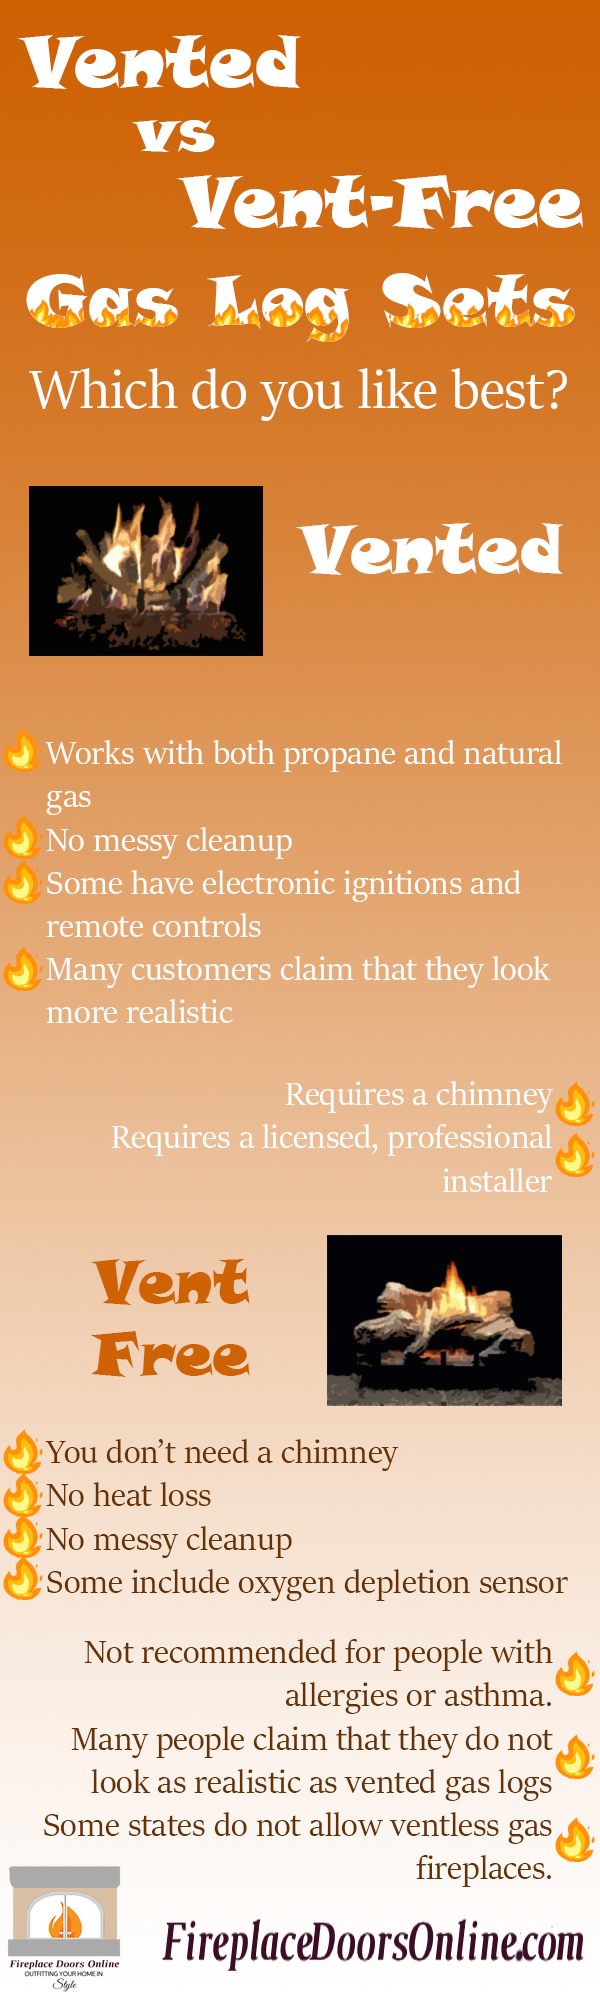 Gas Logs The Log Experts, Difference Between Vented And Vent Free Gas Fireplaces